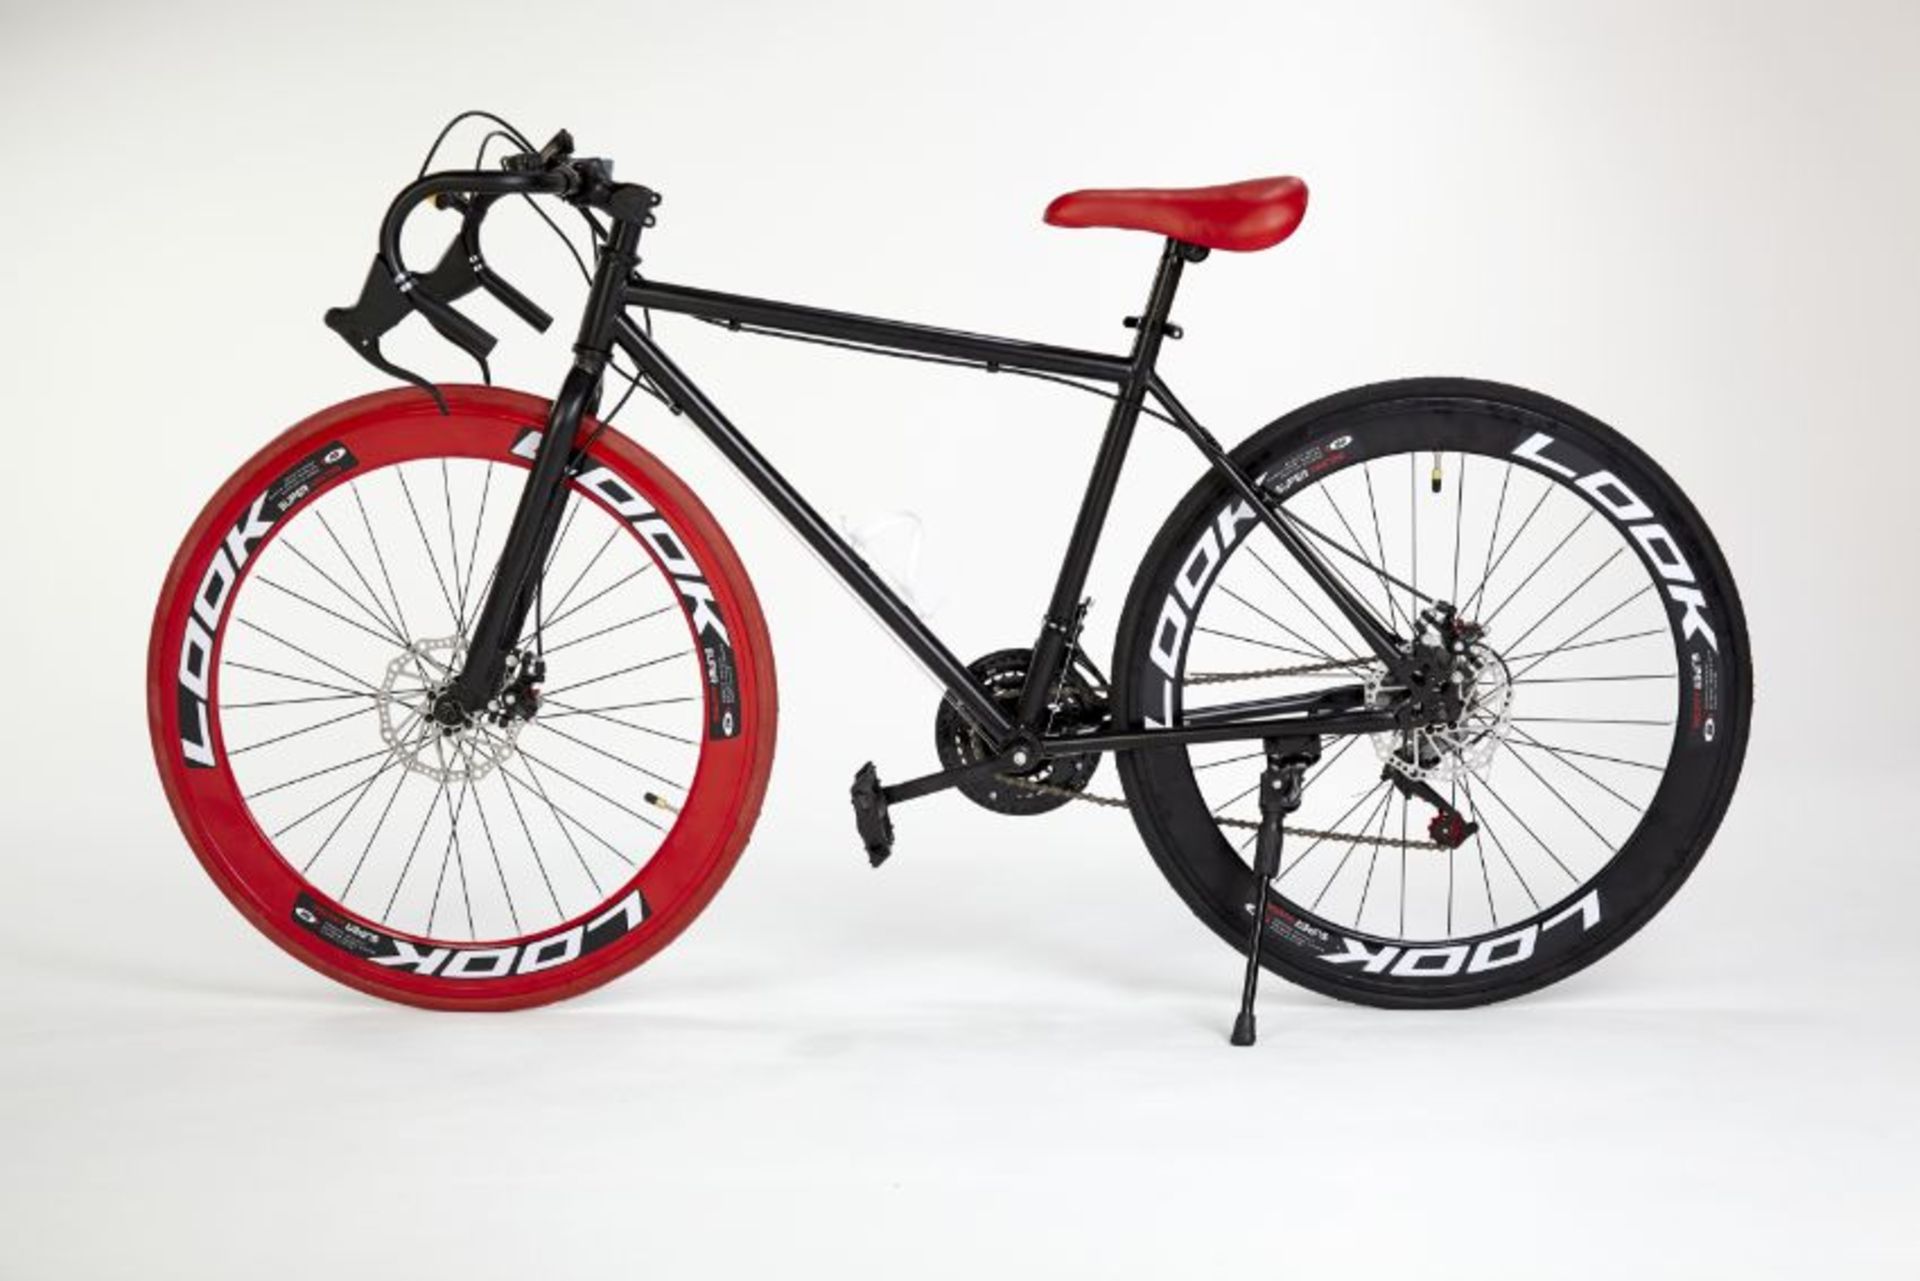 RED/BLACK STREET BIKE WITH 21 GREAR, BRAKE DISKS, KICK STAND, COOL THIN TYRES COMES BOXED - Bild 5 aus 10